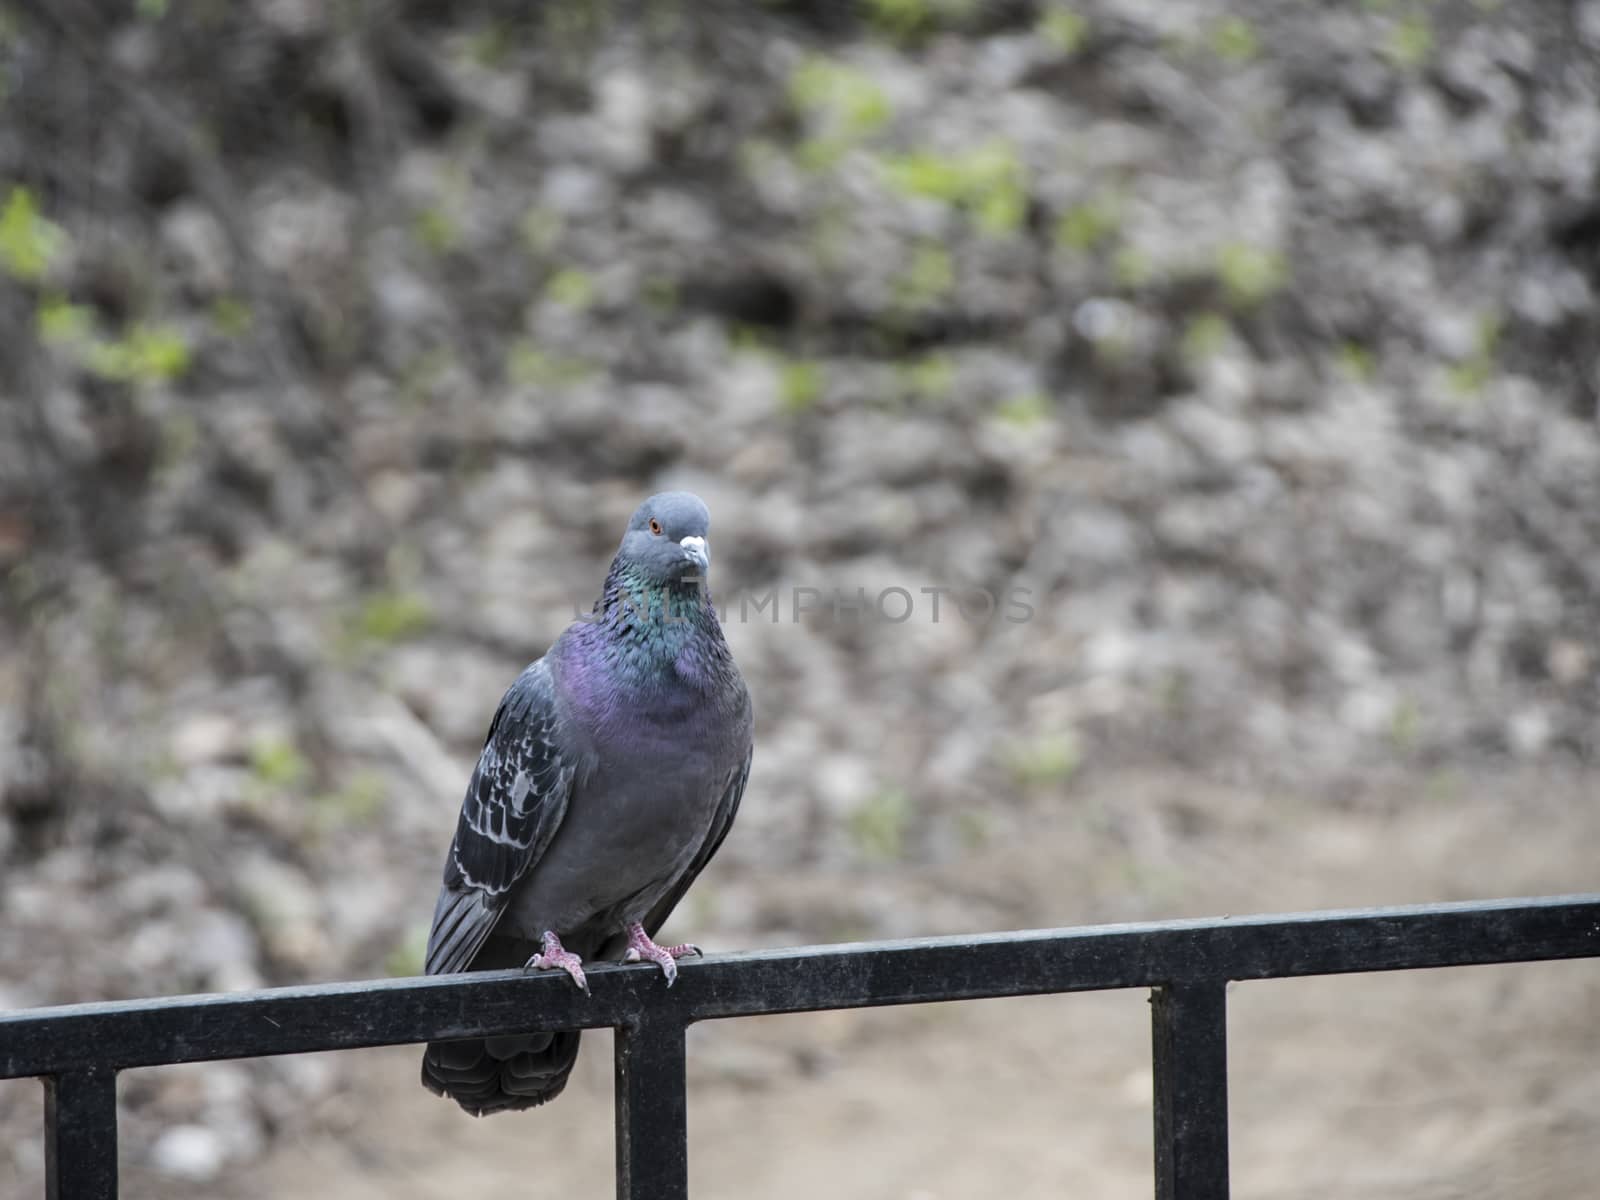 Pigeon on railings in the park. Amazing birds. Spring nature with bird.